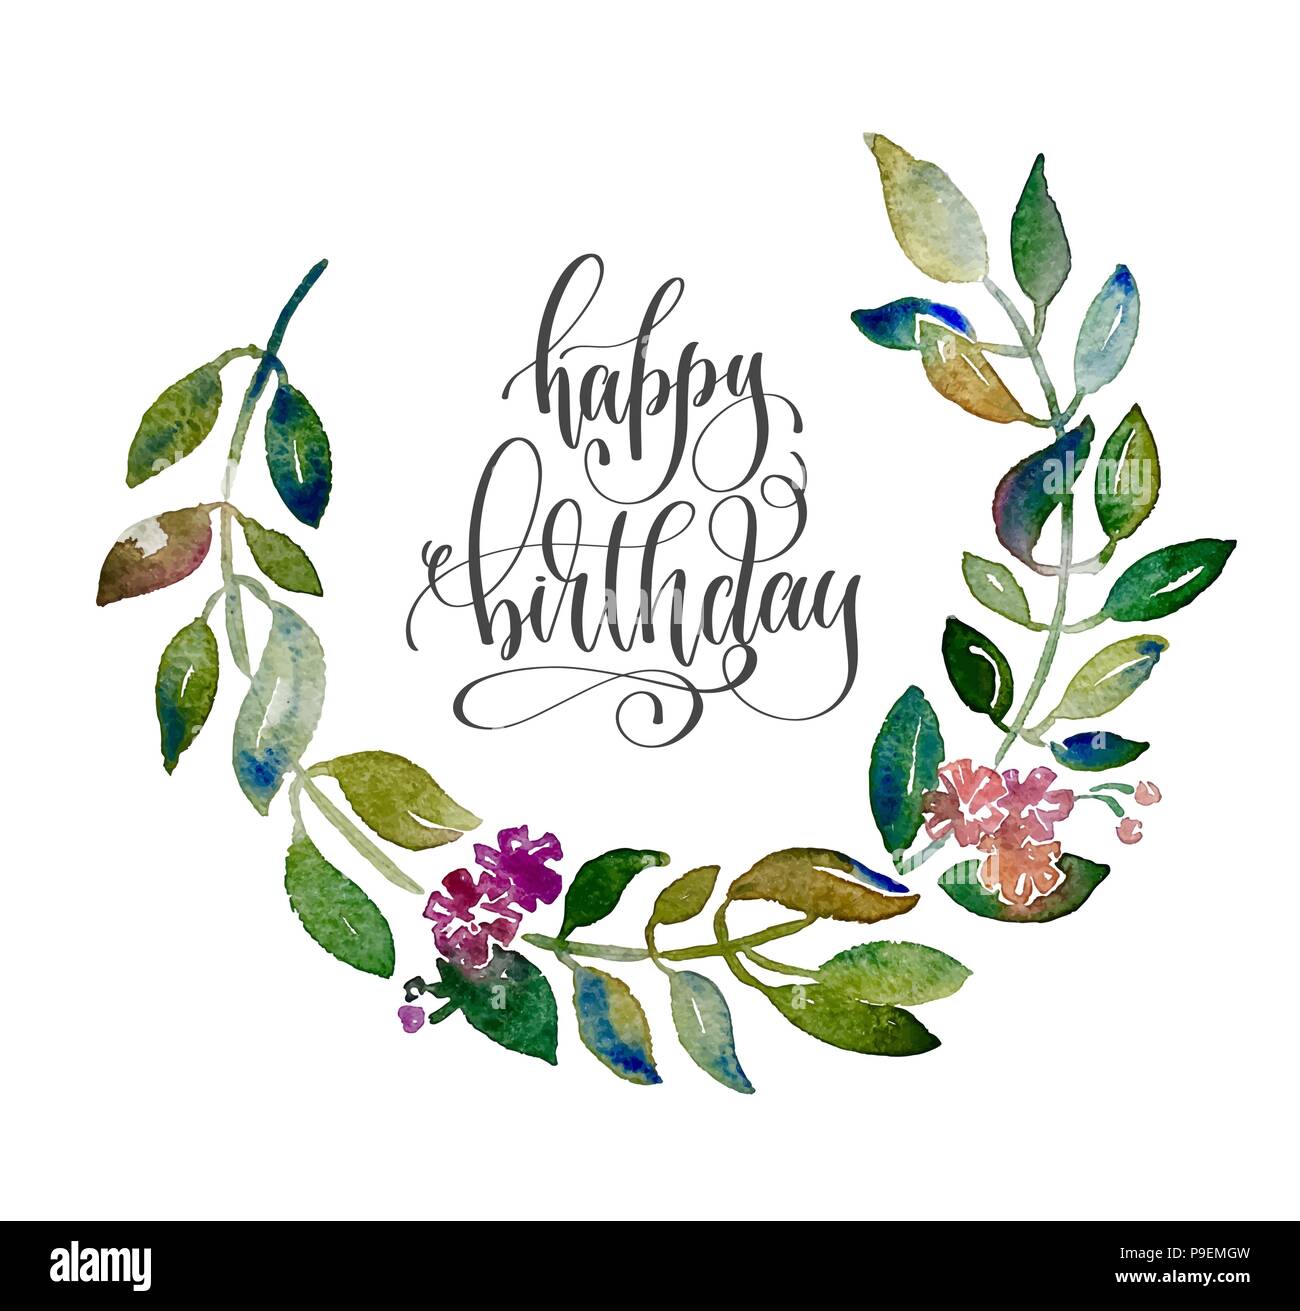 happy birthday greeting cart with handmade circle wreath watercolor branch with leaves and flowers vector illustration isolated on white background Stock Vector